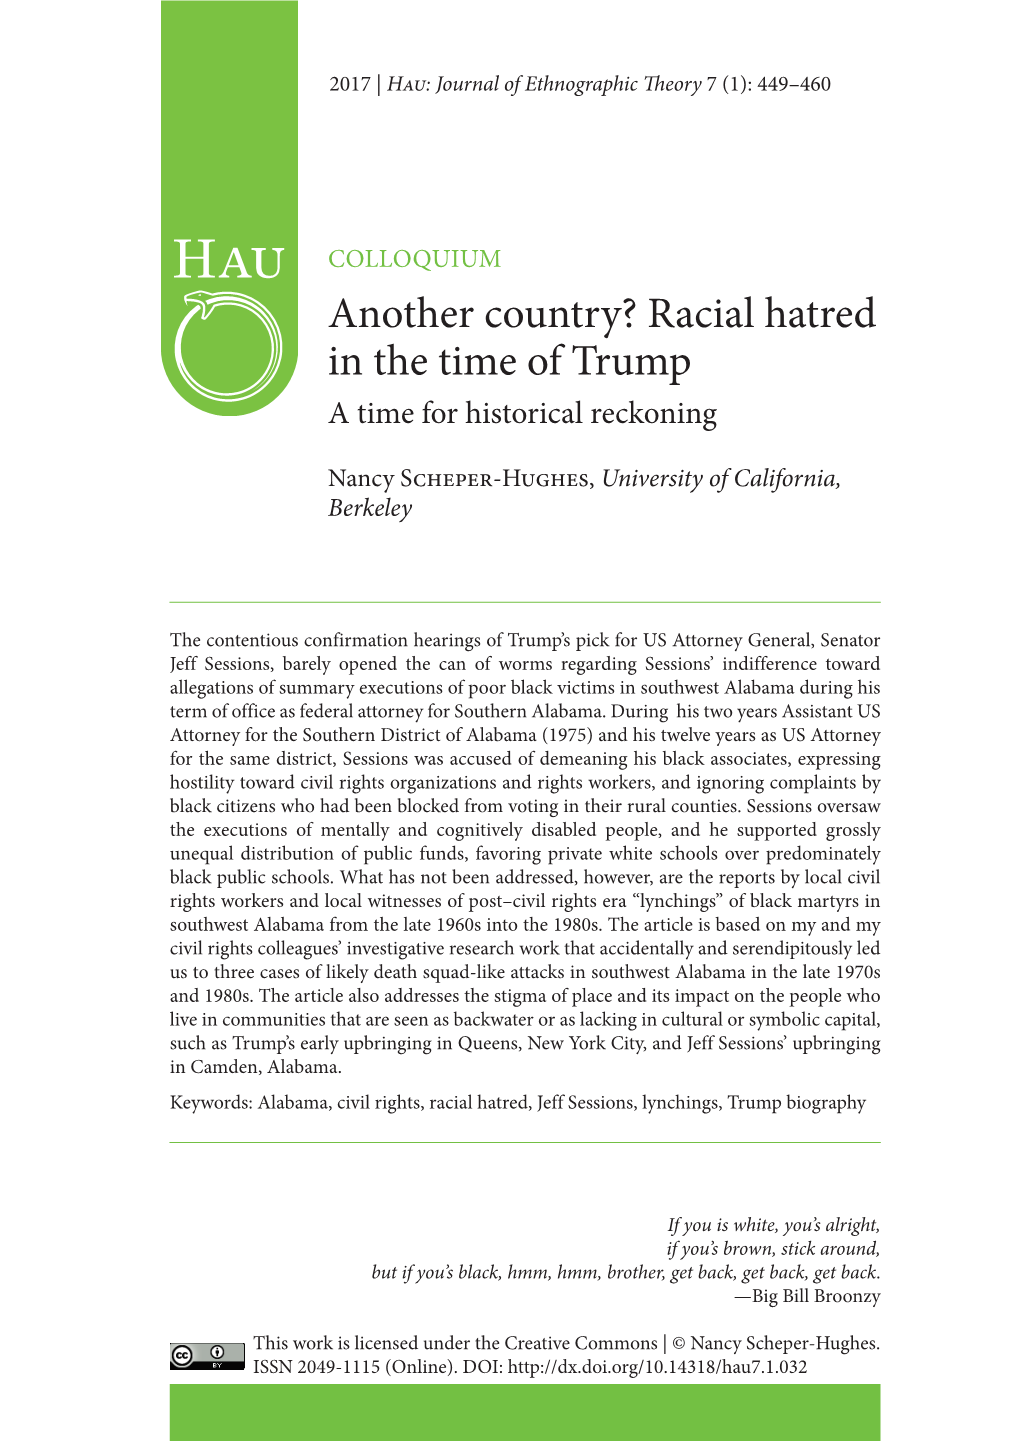 Another Country? Racial Hatred in the Time of Trump a Time for Historical Reckoning